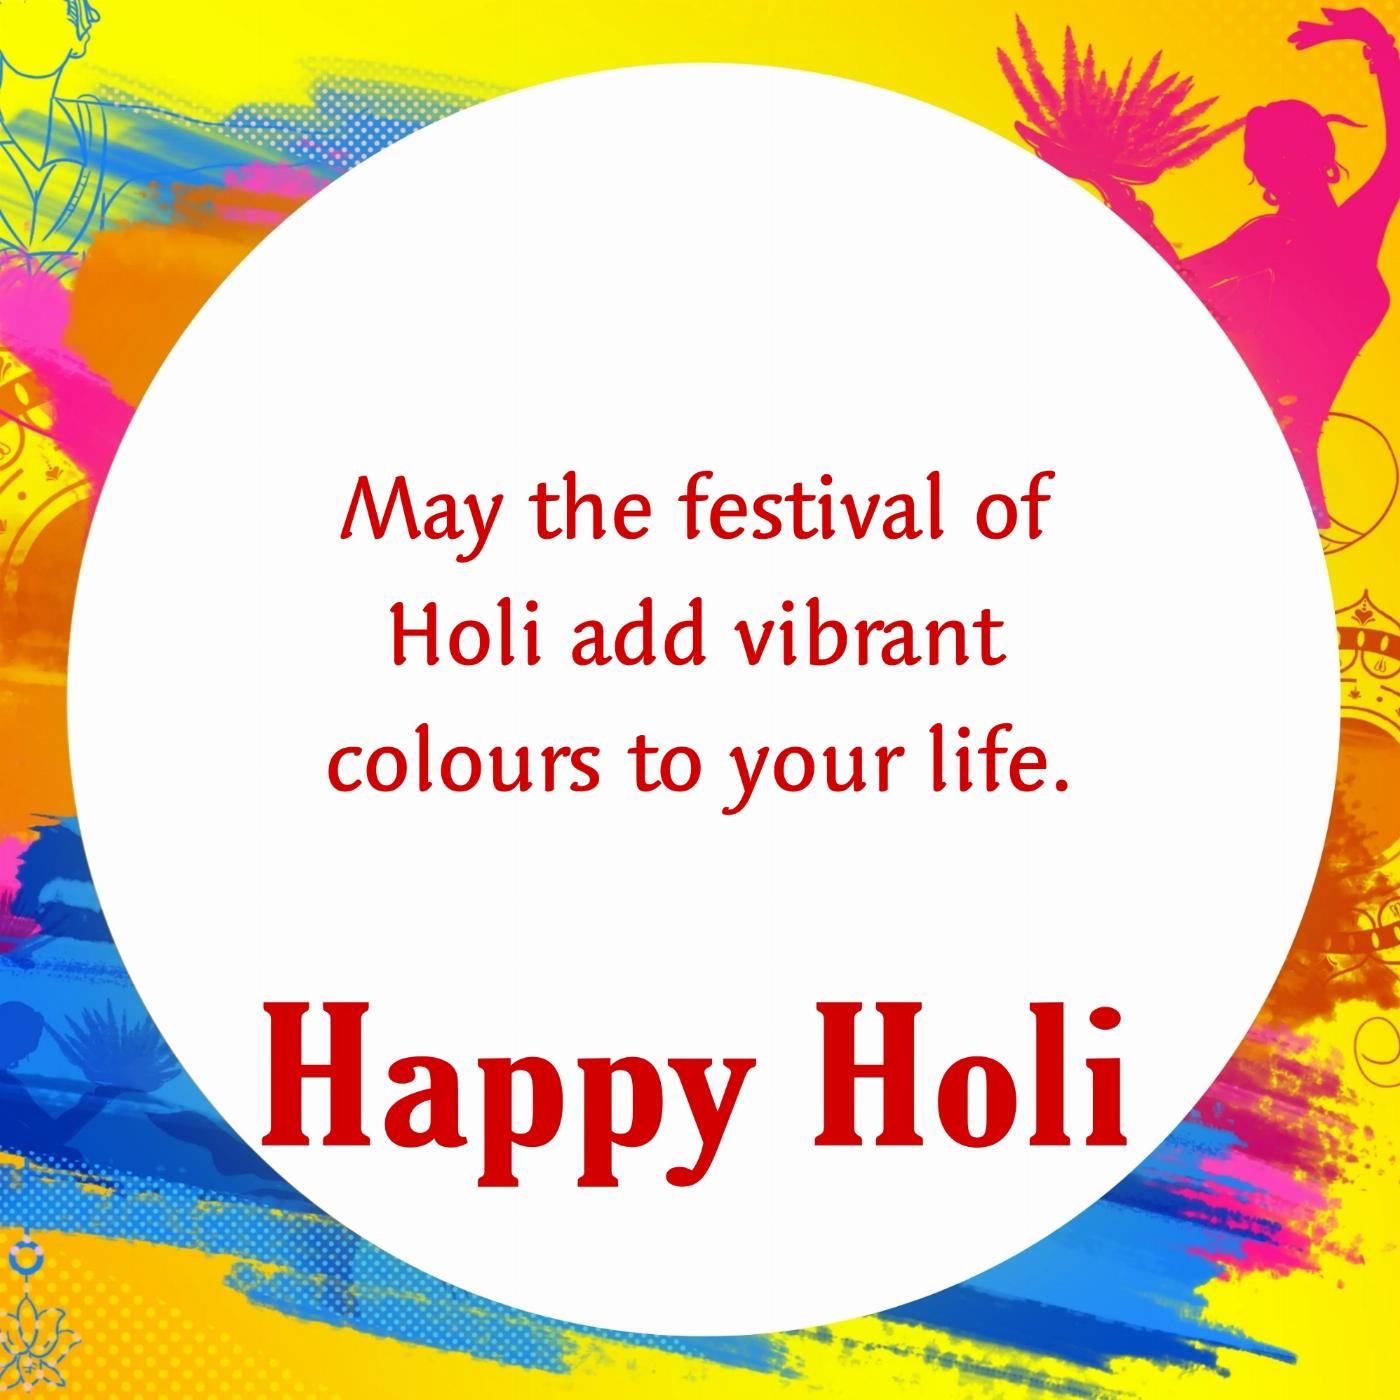 May the festival of Holi add vibrant colours to your life